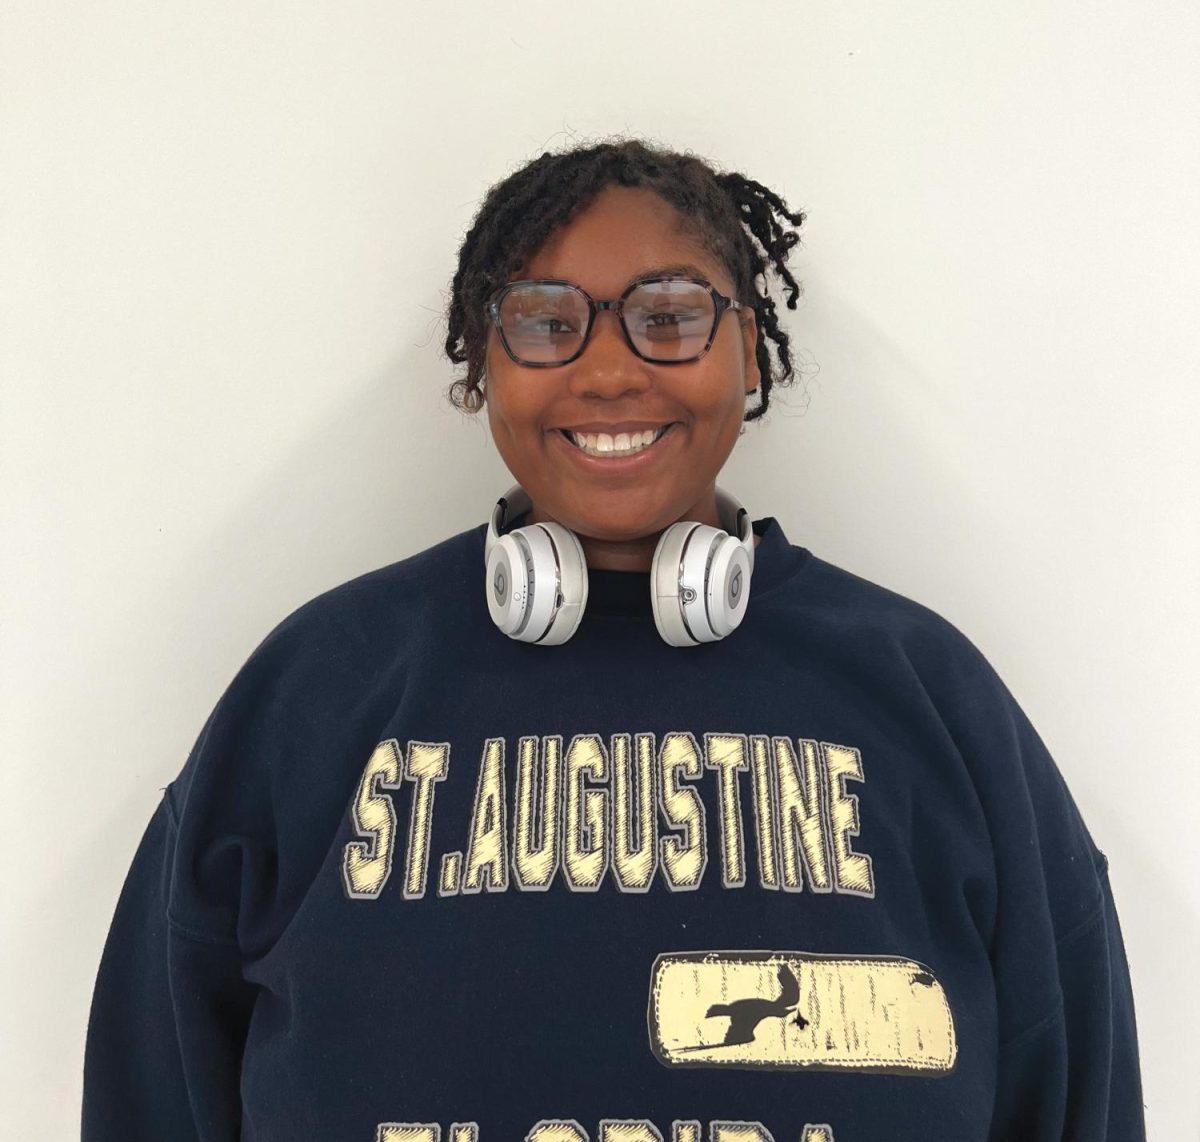 Senior management information systems major Xandria Young is an active and accomplished student on campus. 